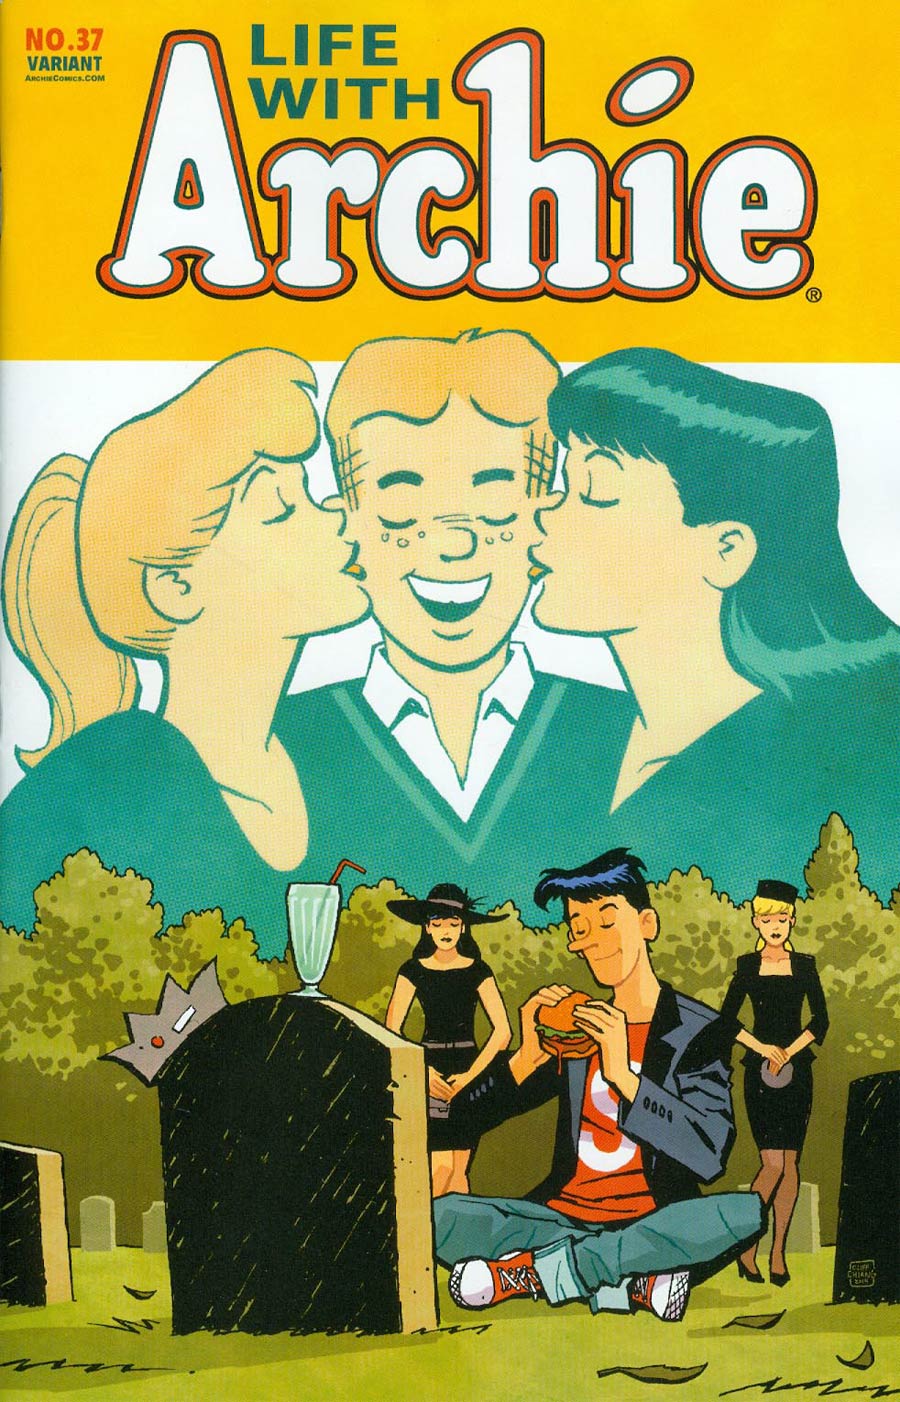 Life With Archie Vol 2 #37 Cover A Comic Format Cliff Chiang Cover